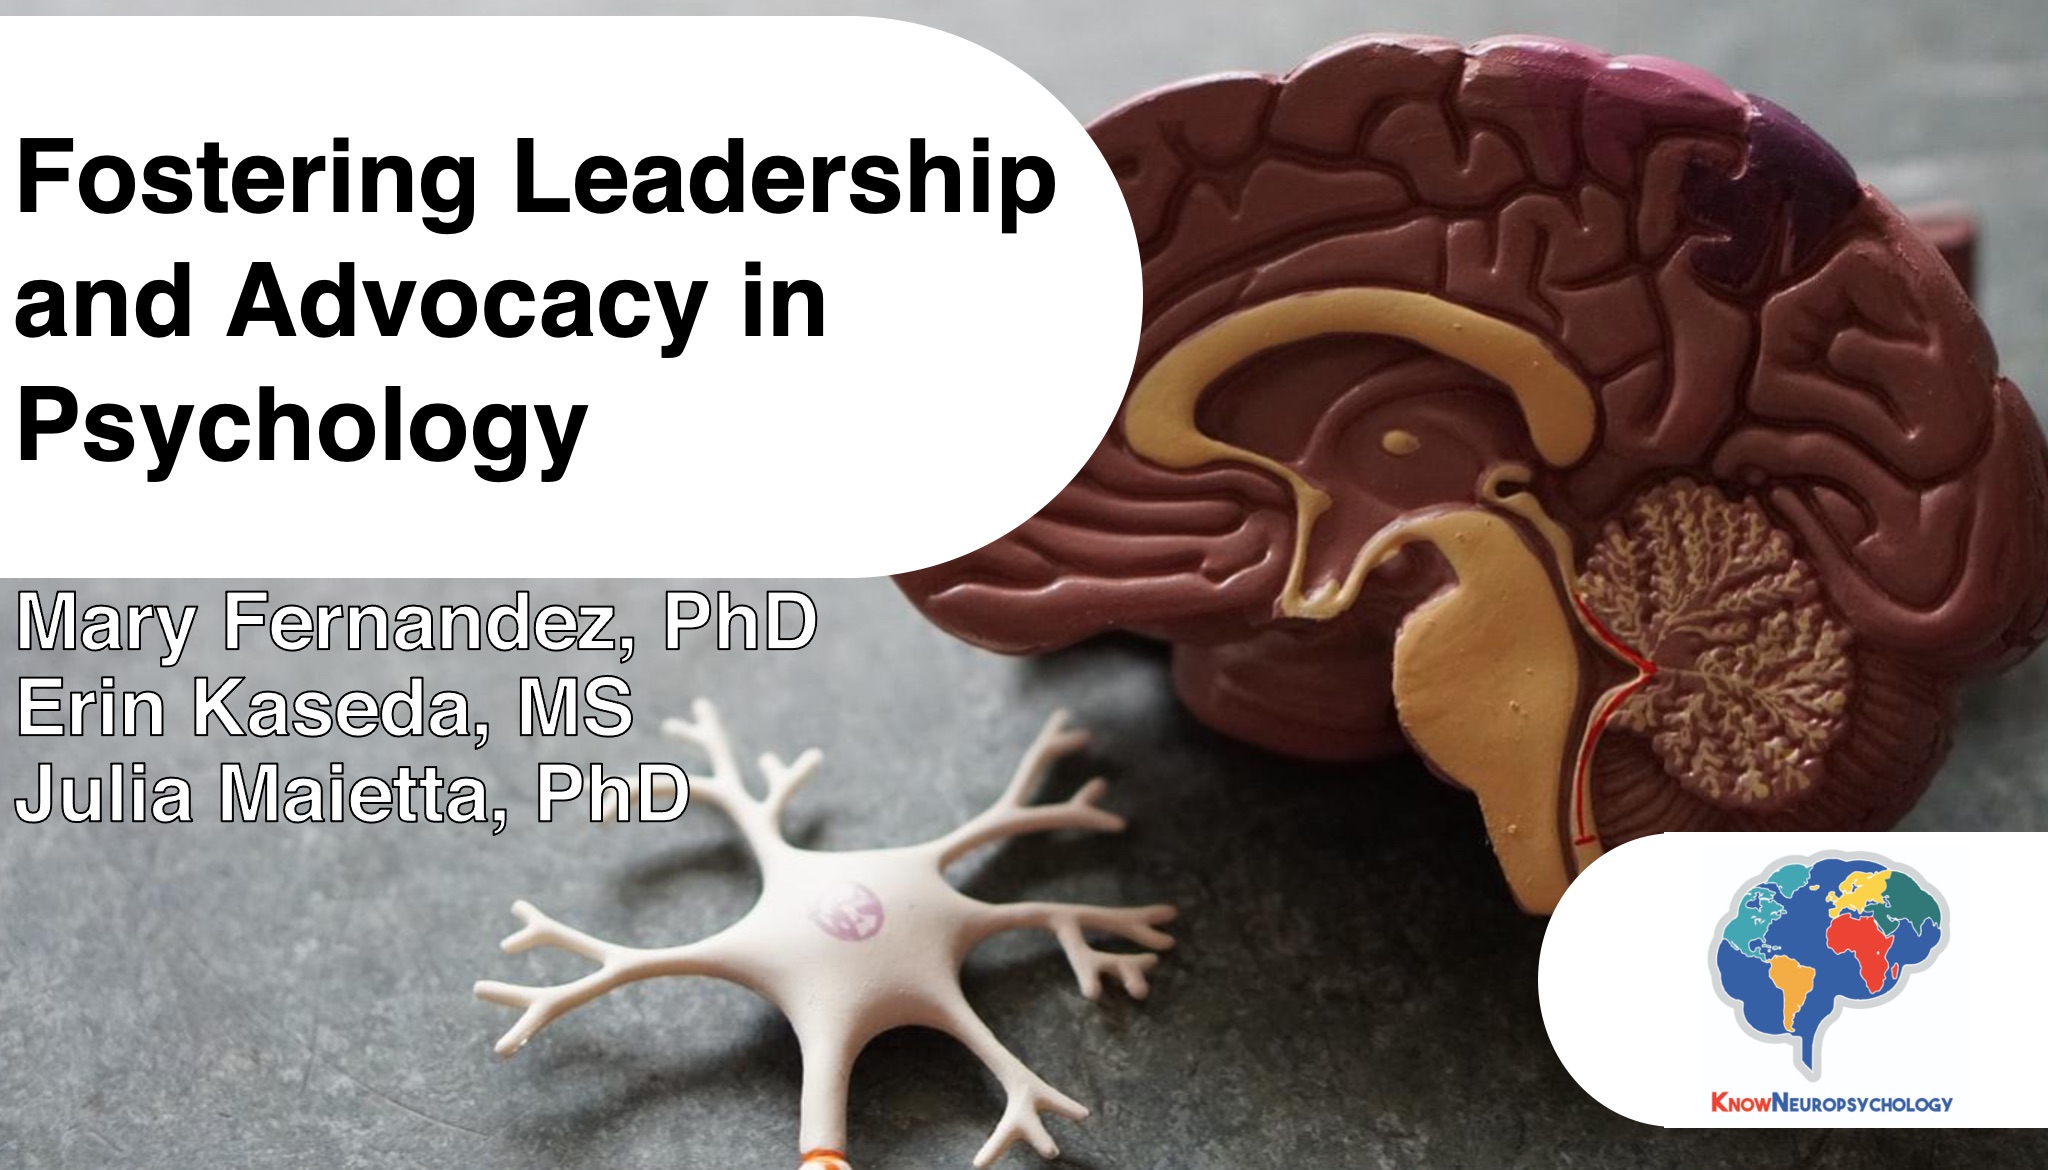 Fostering Leadership and Advocacy in Psychology with Dr. Mary Fernandez, Erin Kaseda, and Dr. Julia Maietta